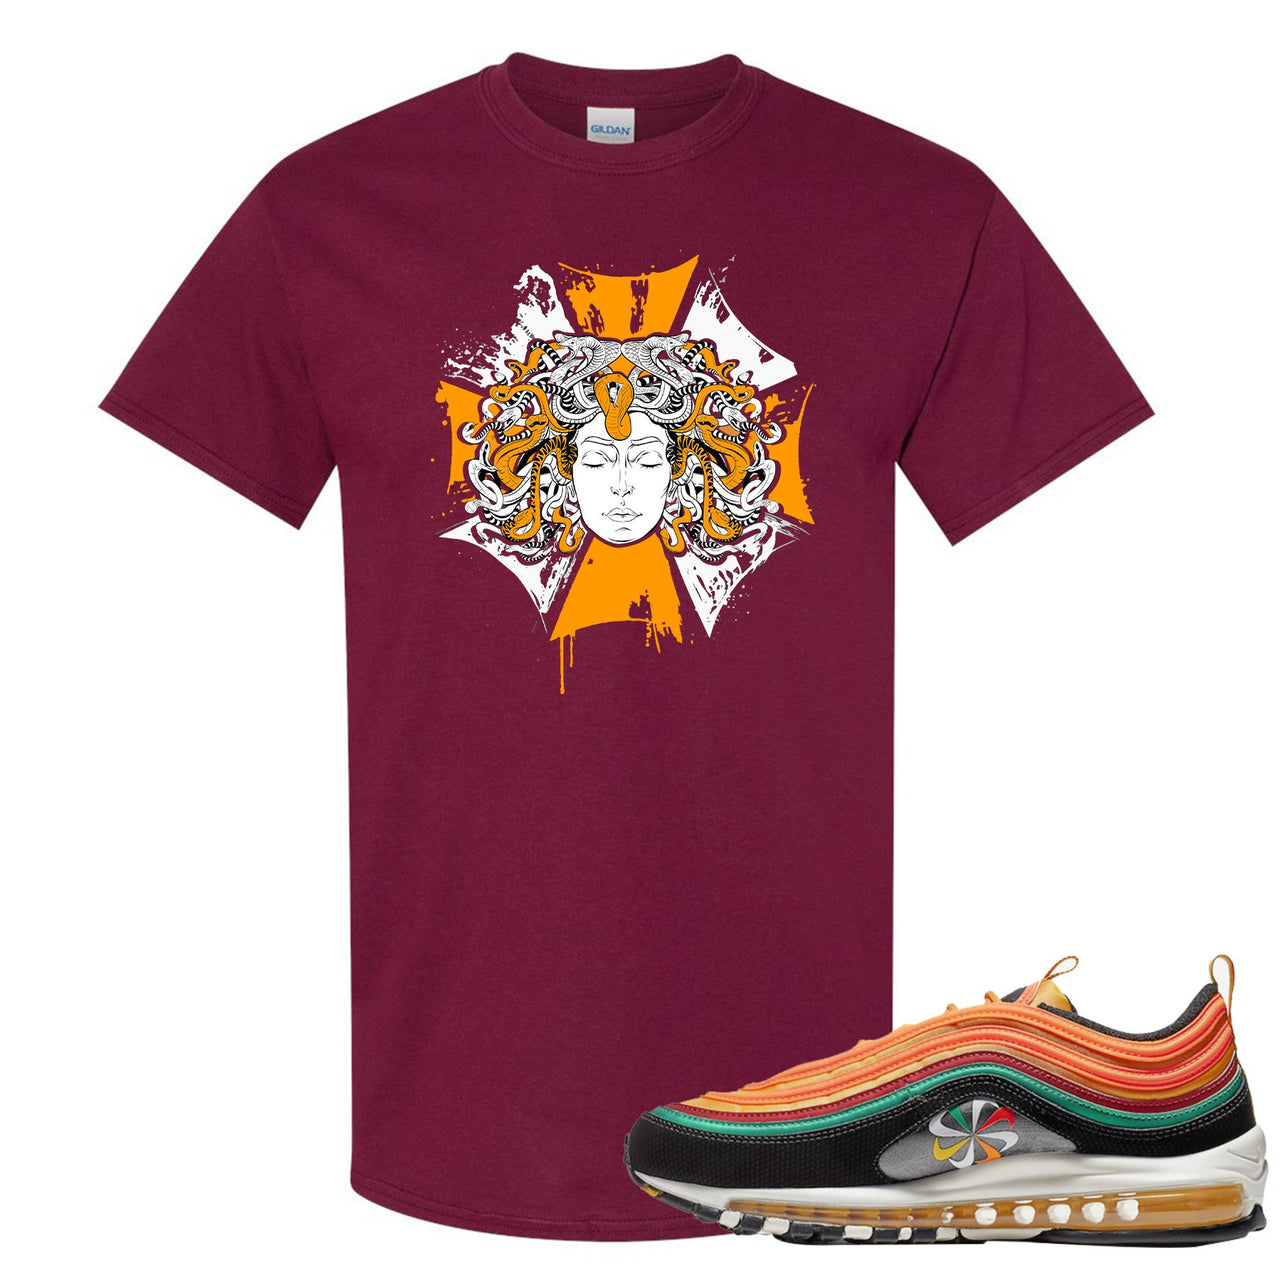 The Air Max 97 sneaker matching maroon t-shirt features the Medusa Sunburst logo printed on the front